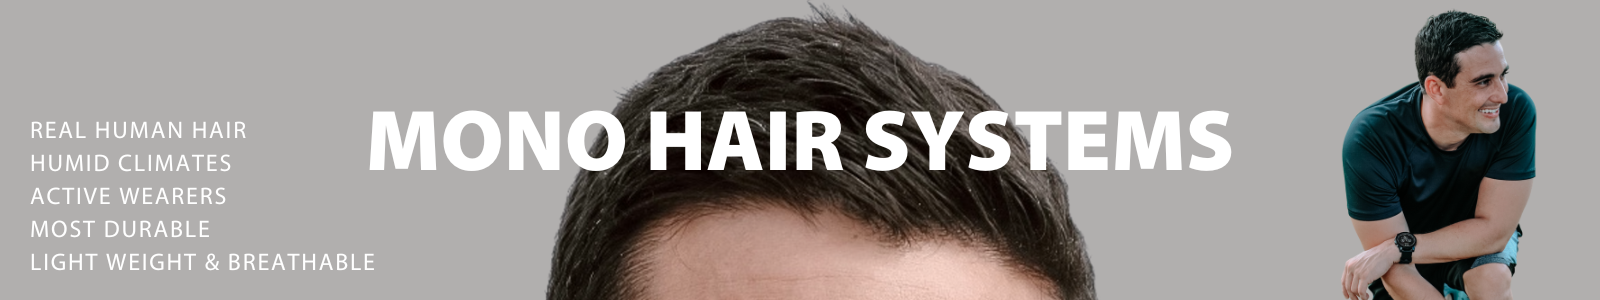 YOUR HAIR MATTERS | MEN'S MONO HAIR SYSTEMS | REAL HUMAN HAIR SYSTEMS | BENEFITS OF MEN'S LACE HAIR SYSTEMS | MALE PATTERN BALDNESS | MALE HAIR LOSS | ALOPECIA